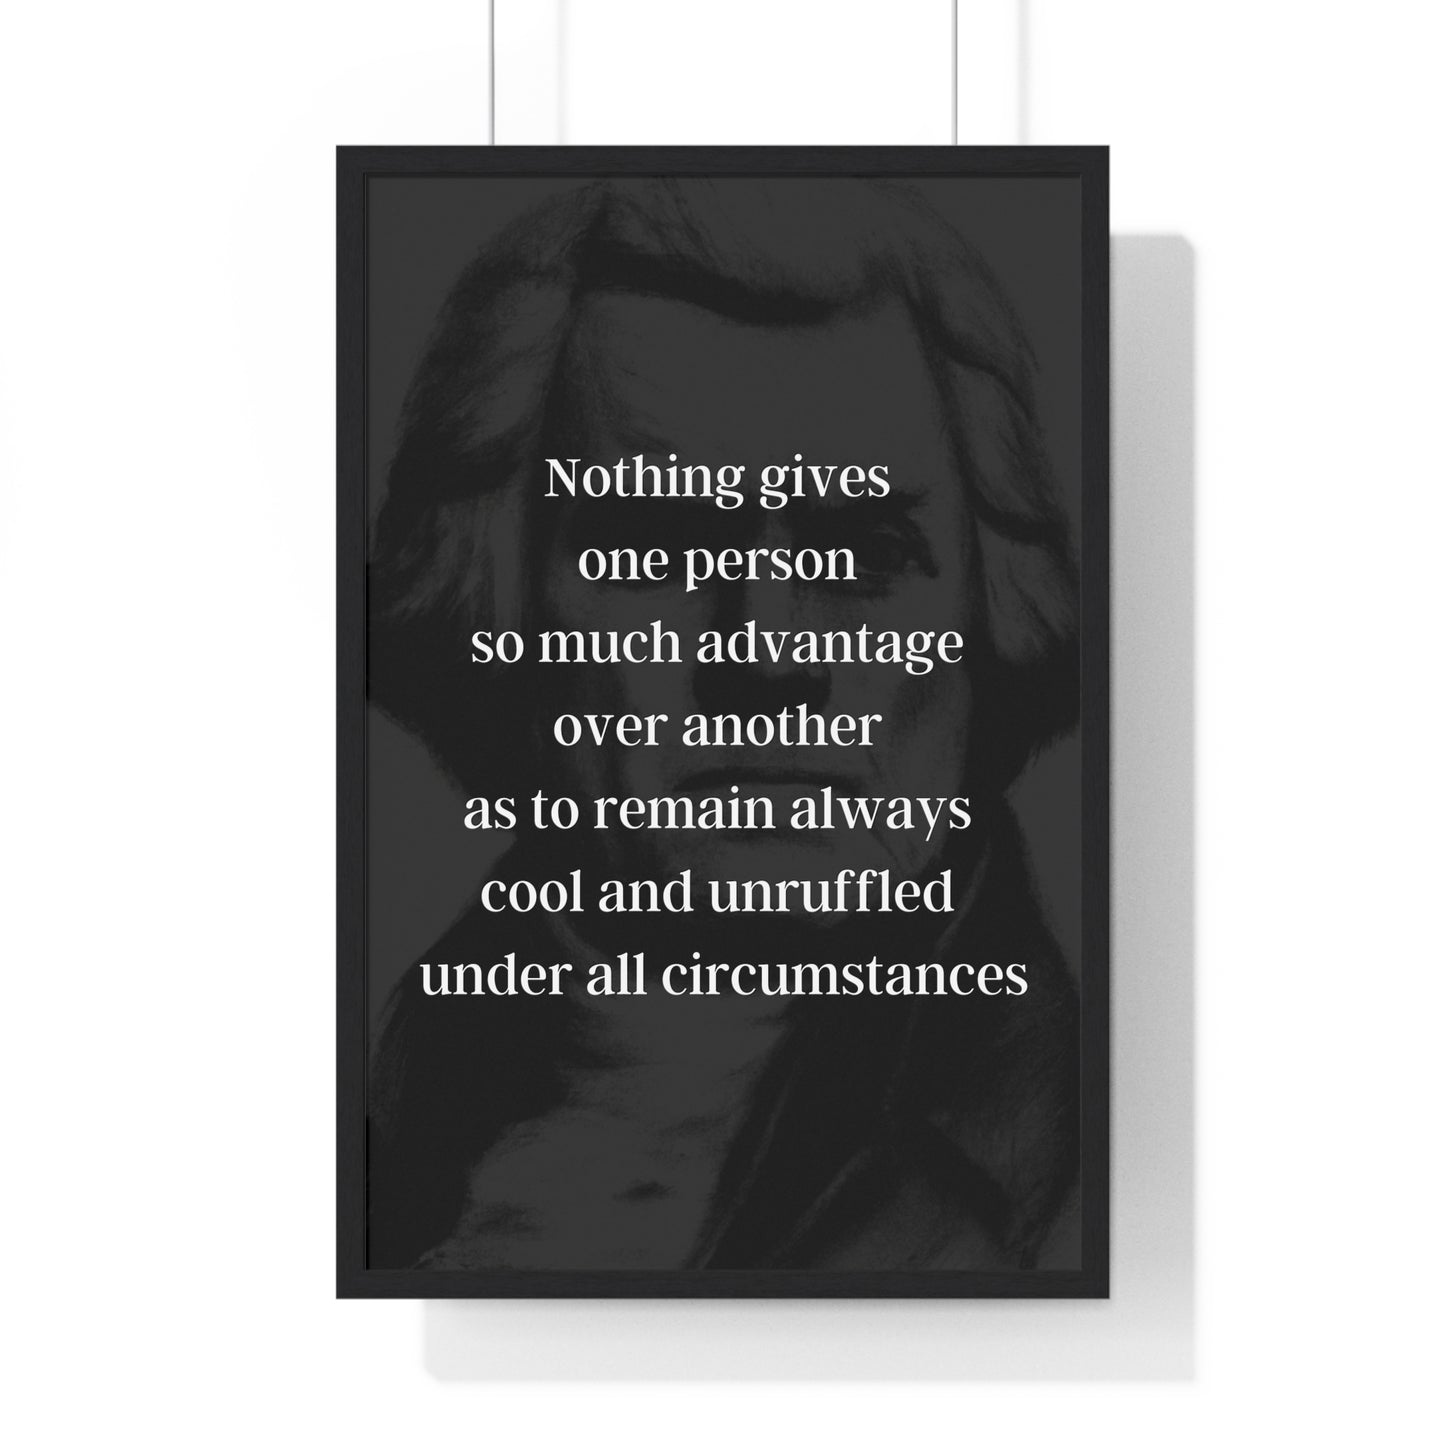 Thomas Jefferson Quote 3, Poster Art, Dark Print, 3rd President of the United States, American Patriots, AI Art, Political Art, Poster Prints, Presidential Portraits, Presidential Quotes, Inspirational Quotes